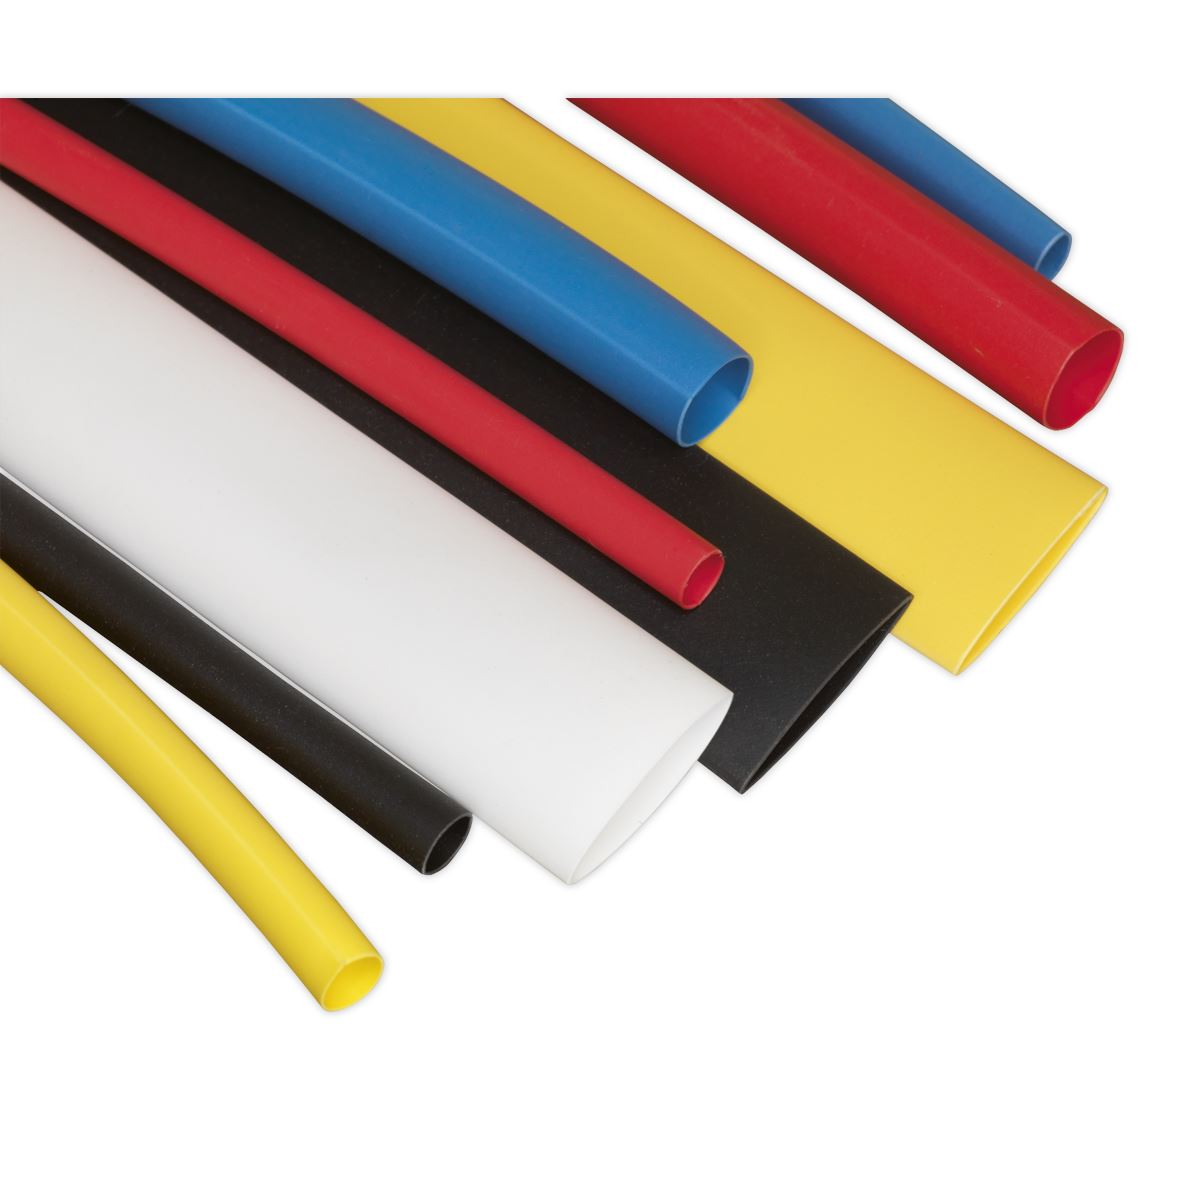 Sealey Heat Shrink Tubing Assortment 95pc 100mm Mixed Colours